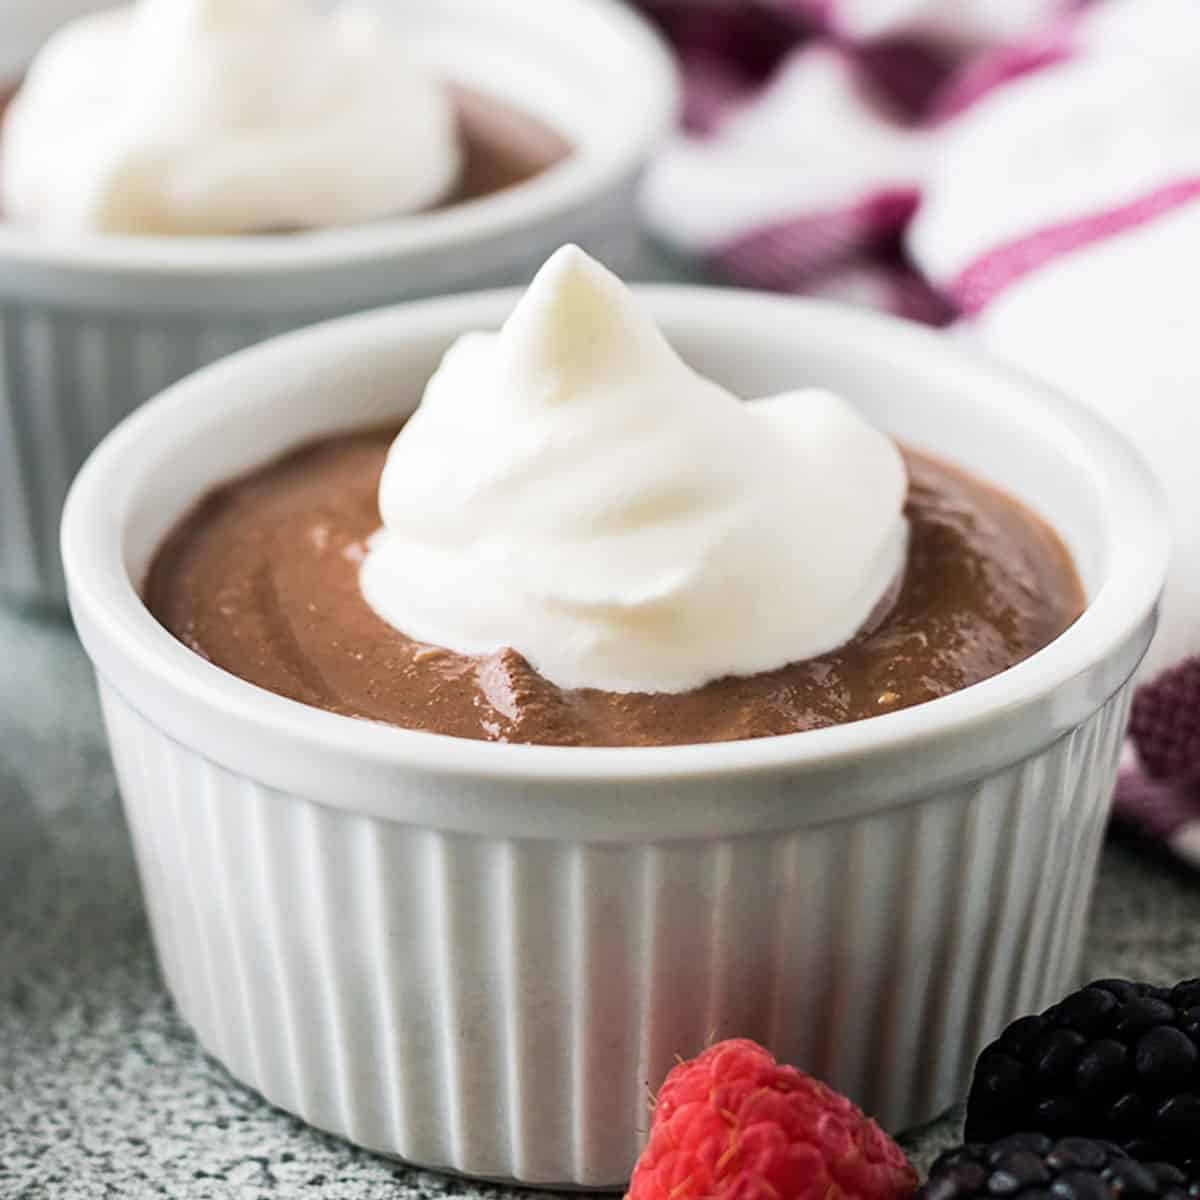 Ramekin filled with homemade chocolate pudding and topped with homemade whipped cream.